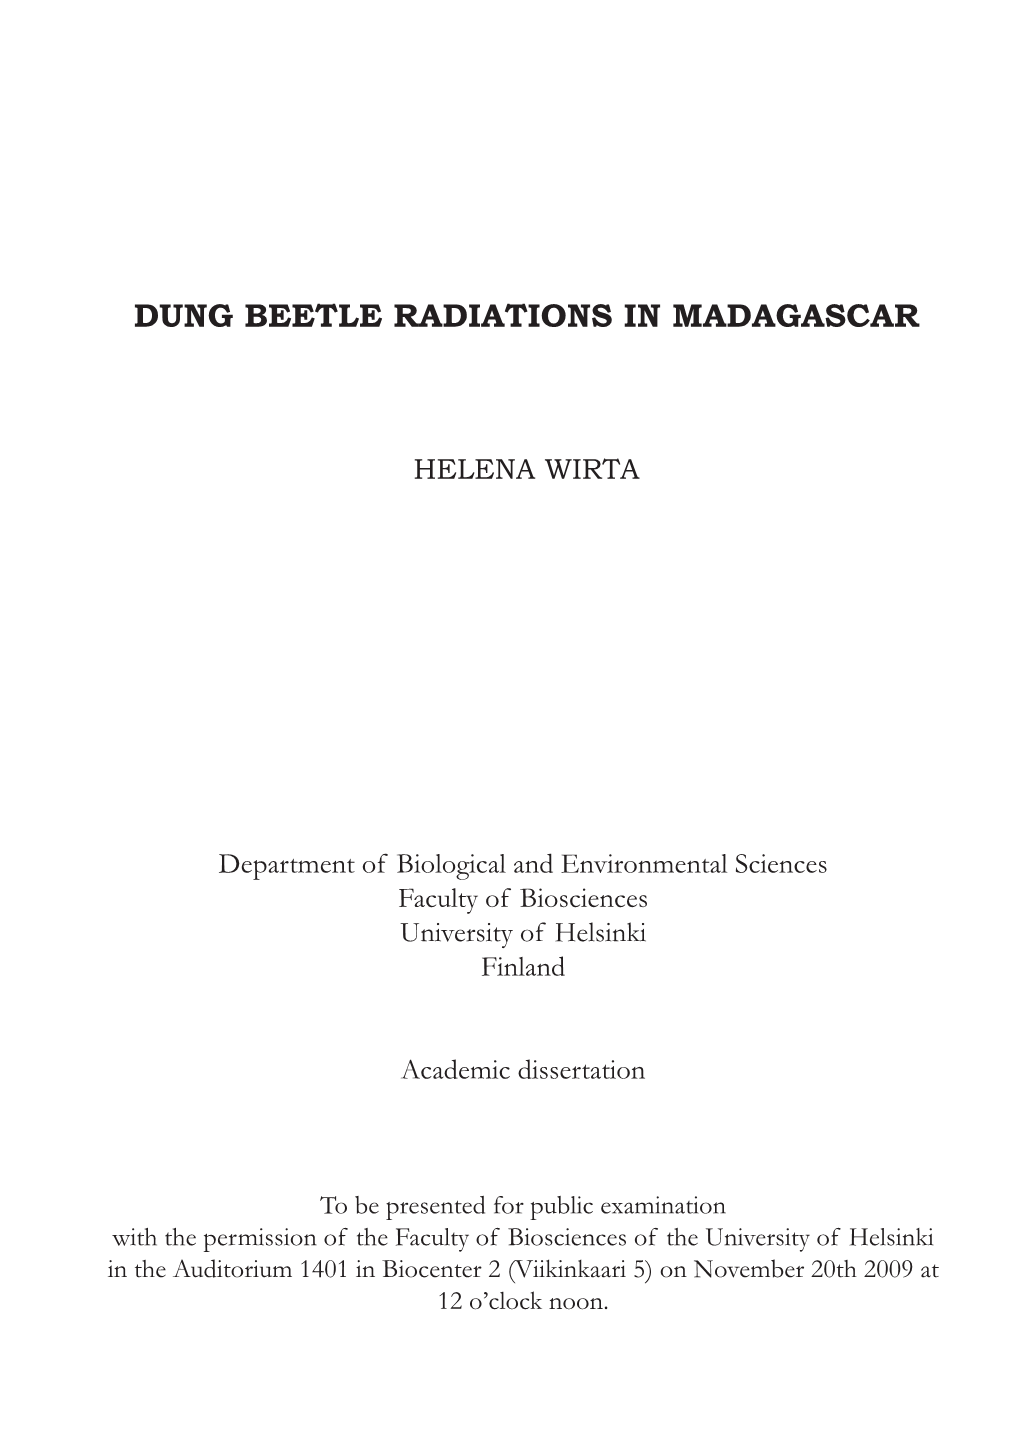 Dung Beetle Radiations in Madagascar